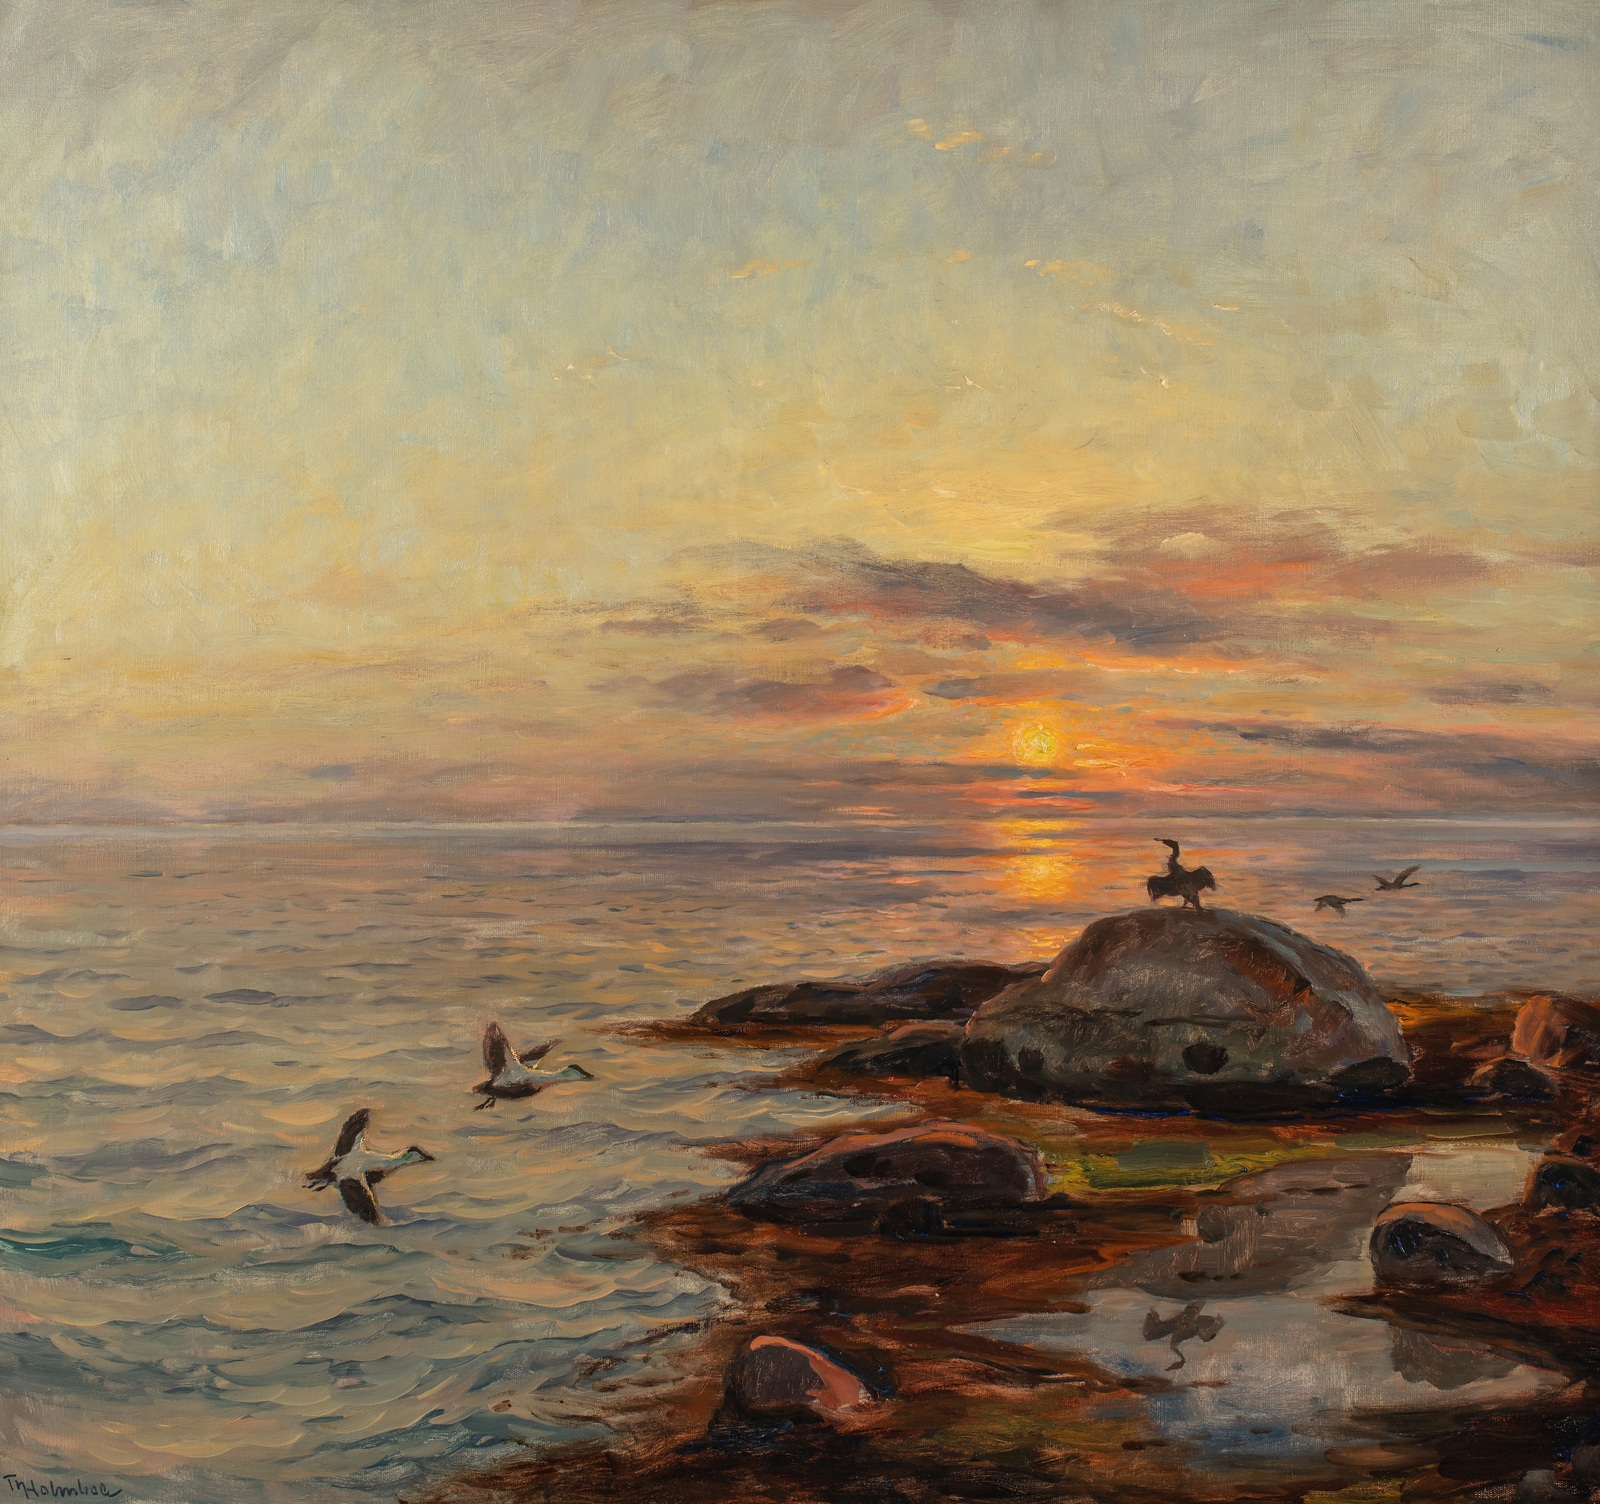 Artwork by Thorolf Holmboe, THOROLF HOLMBOE (1866-1935), Made of Oil on canvas